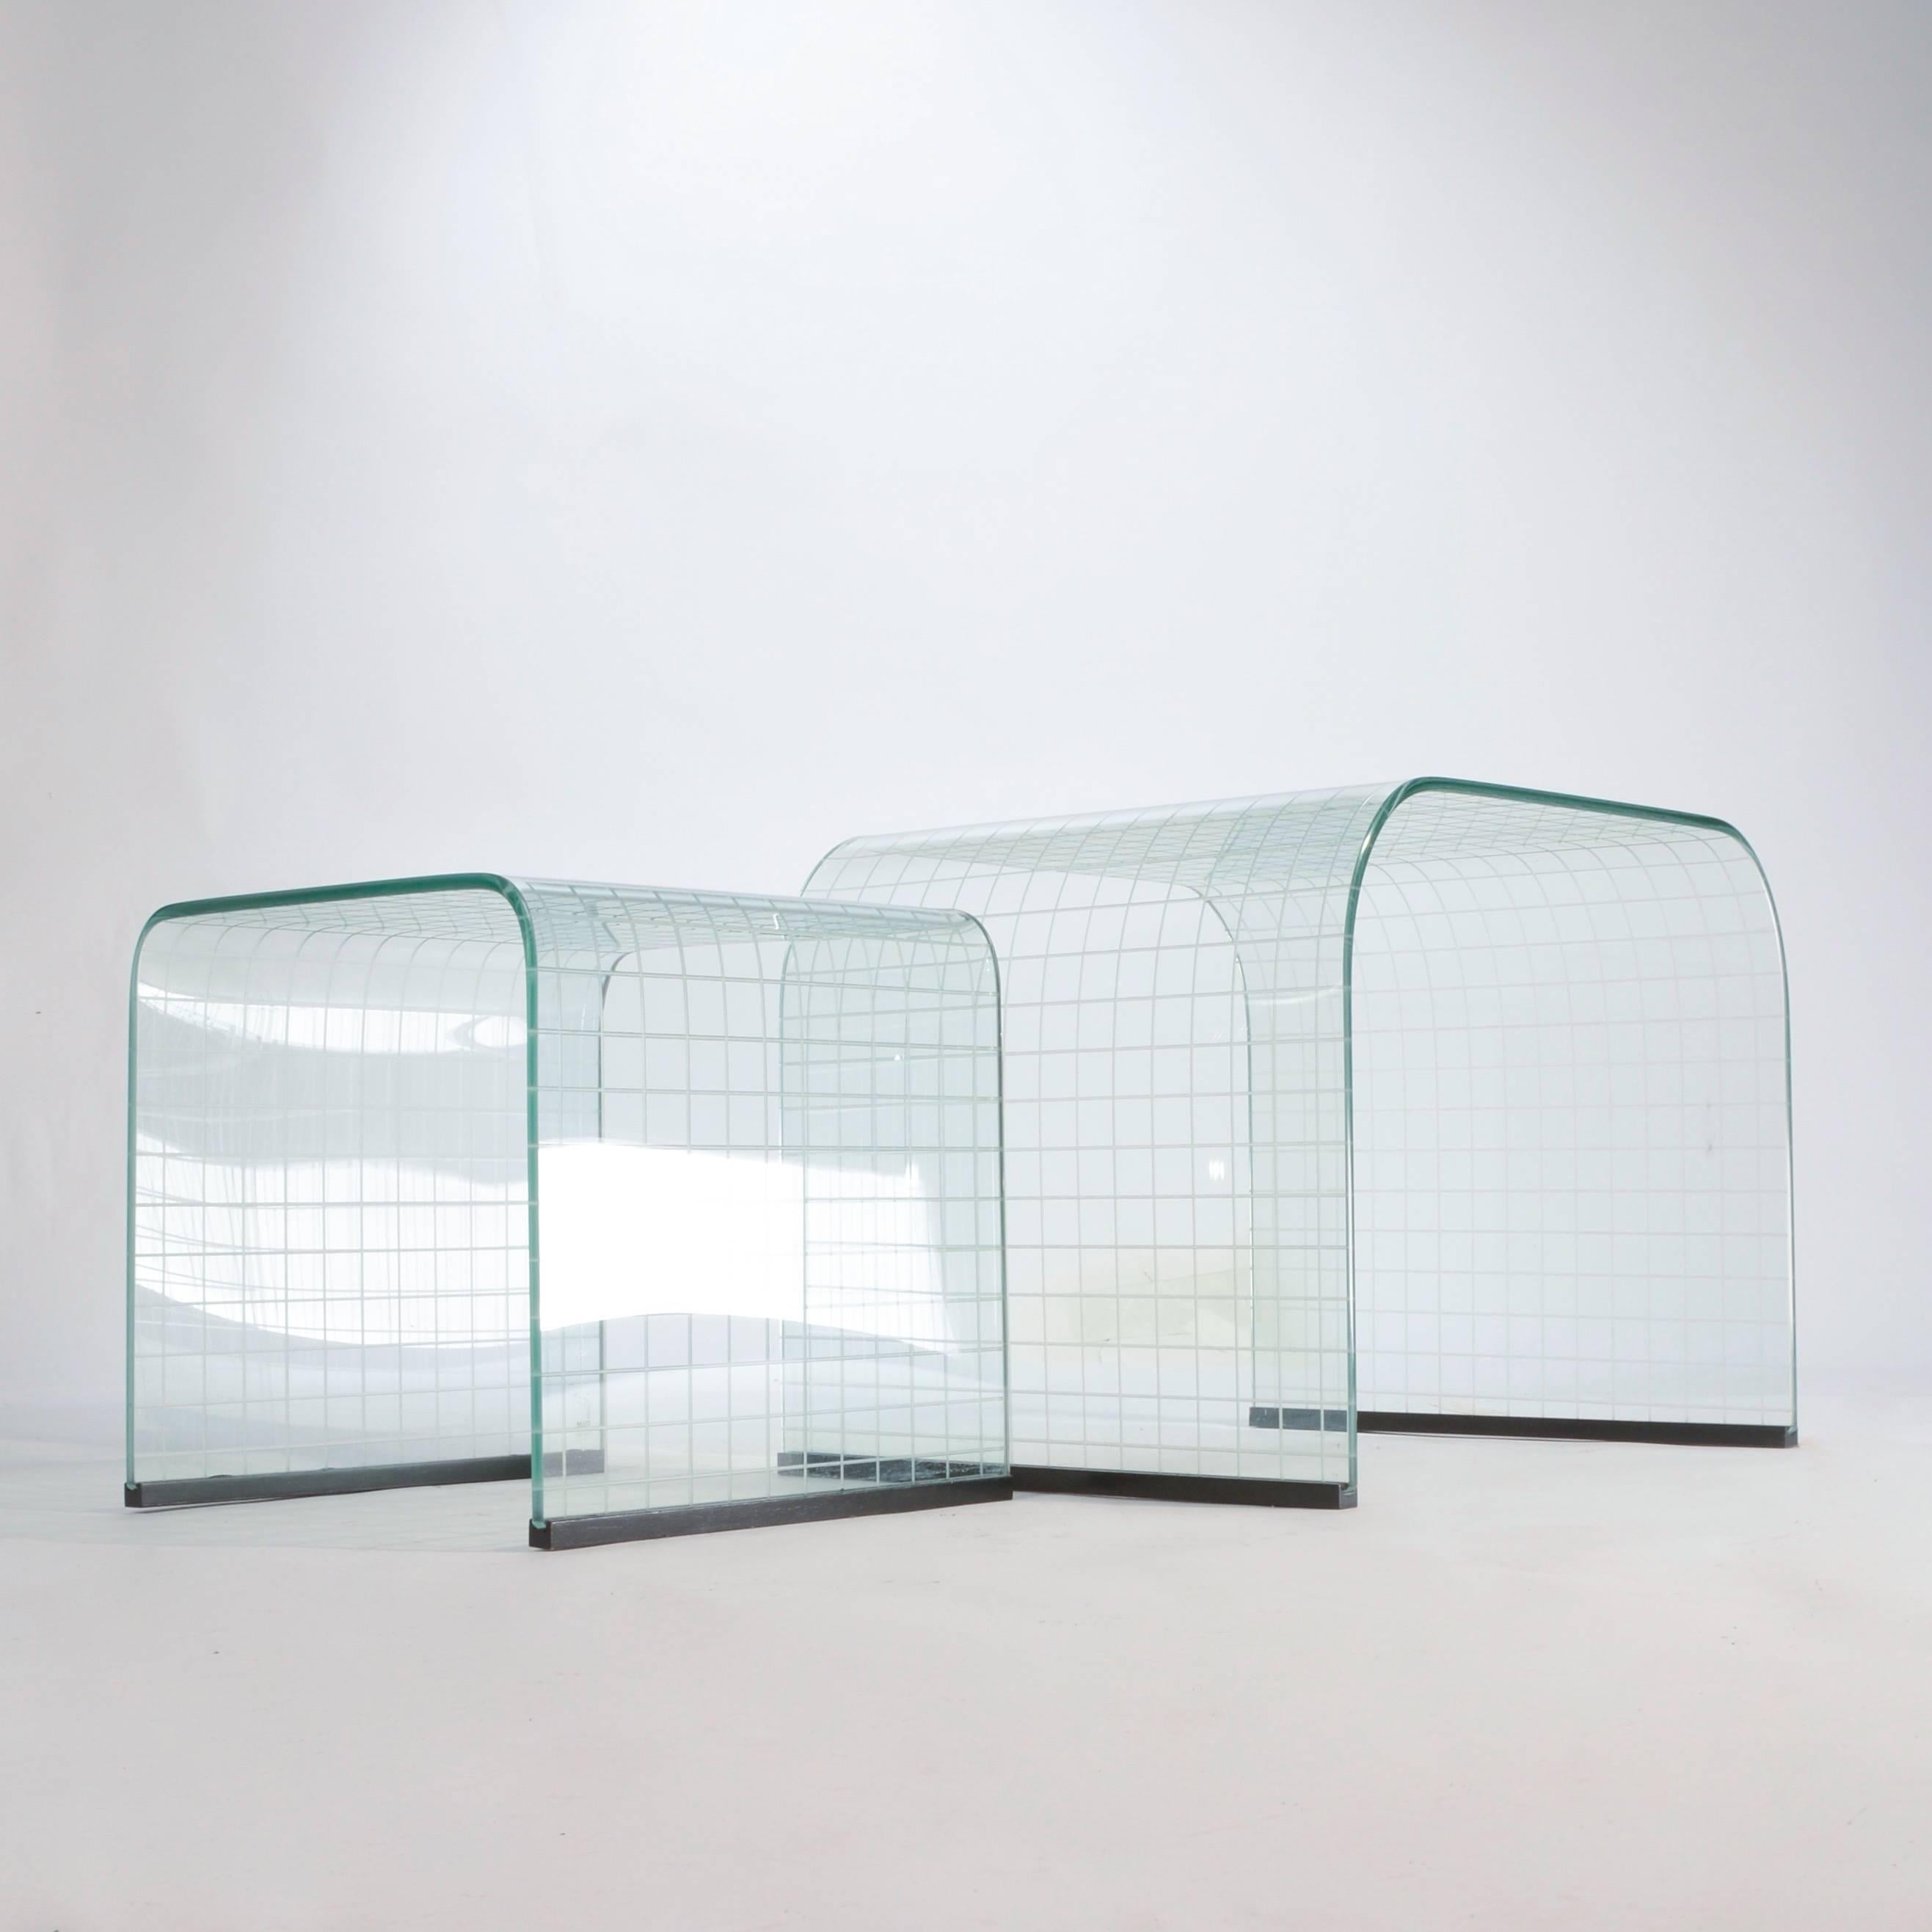 Molded glass nesting tables by Angelo Cortesi, made in Italy. They can nest together or be pulled apart they make a beautiful layered effect. The glass is tempered and the edges are beveled.